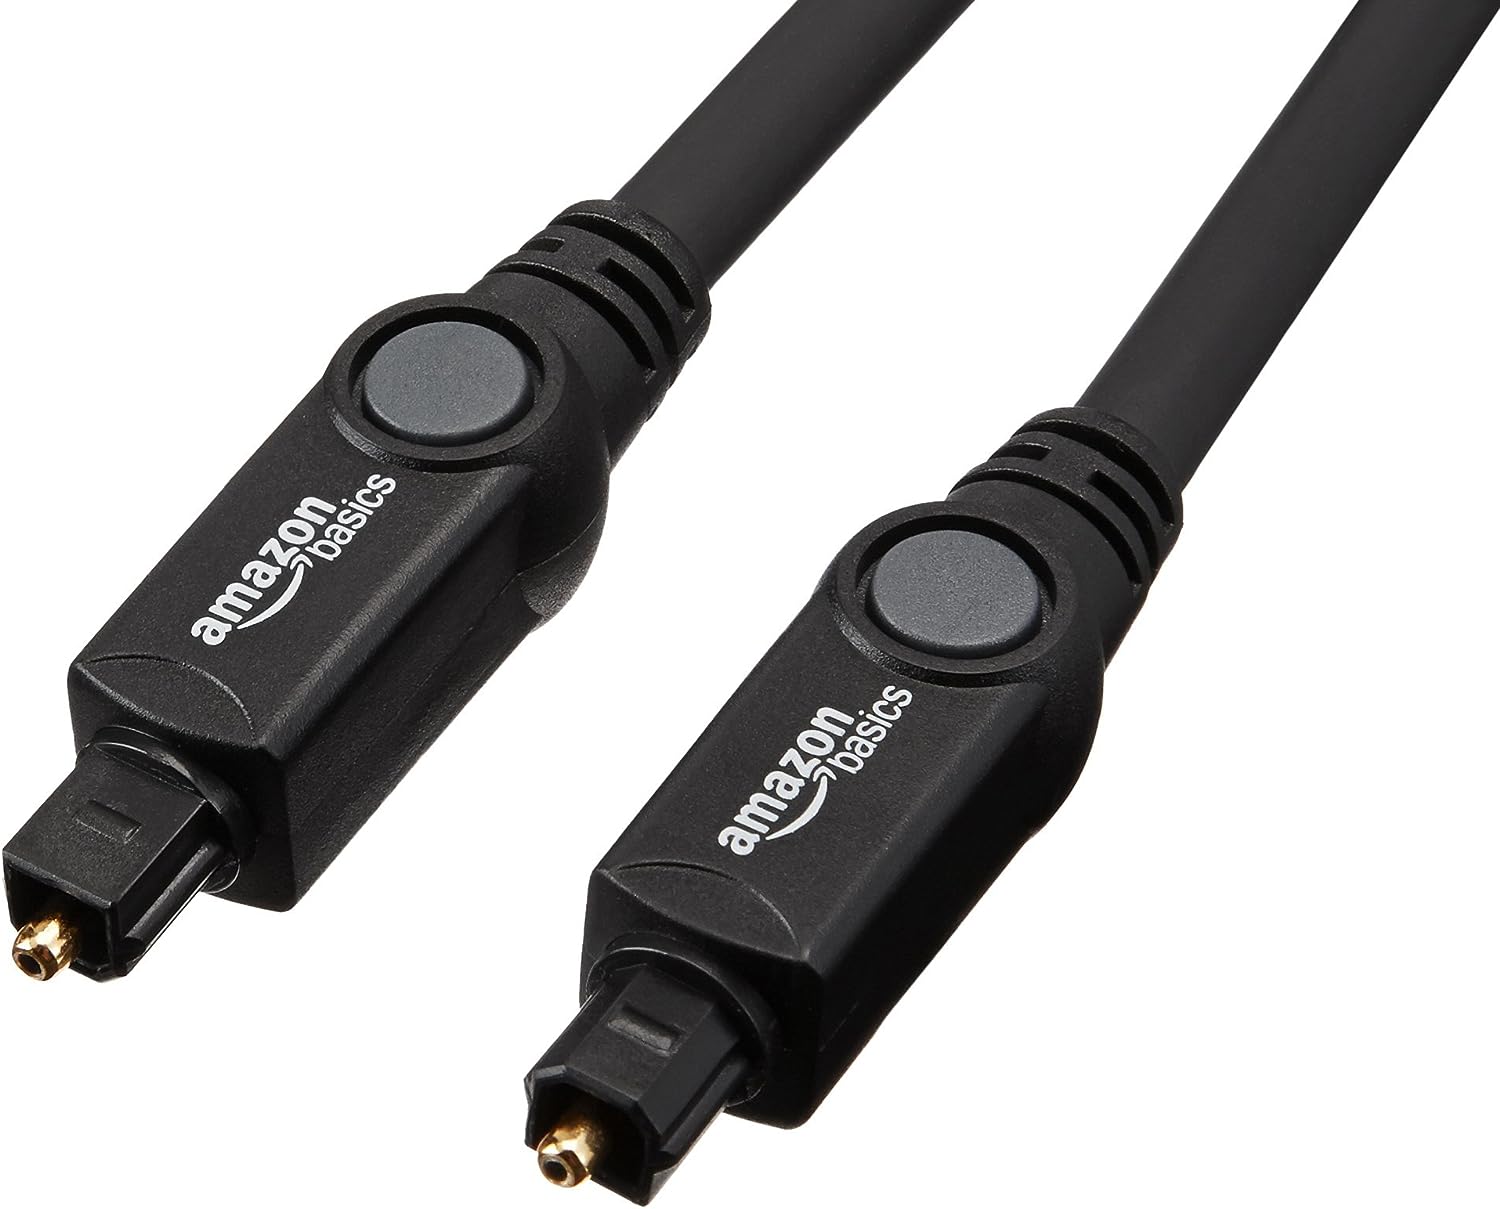 optical cable detailed review